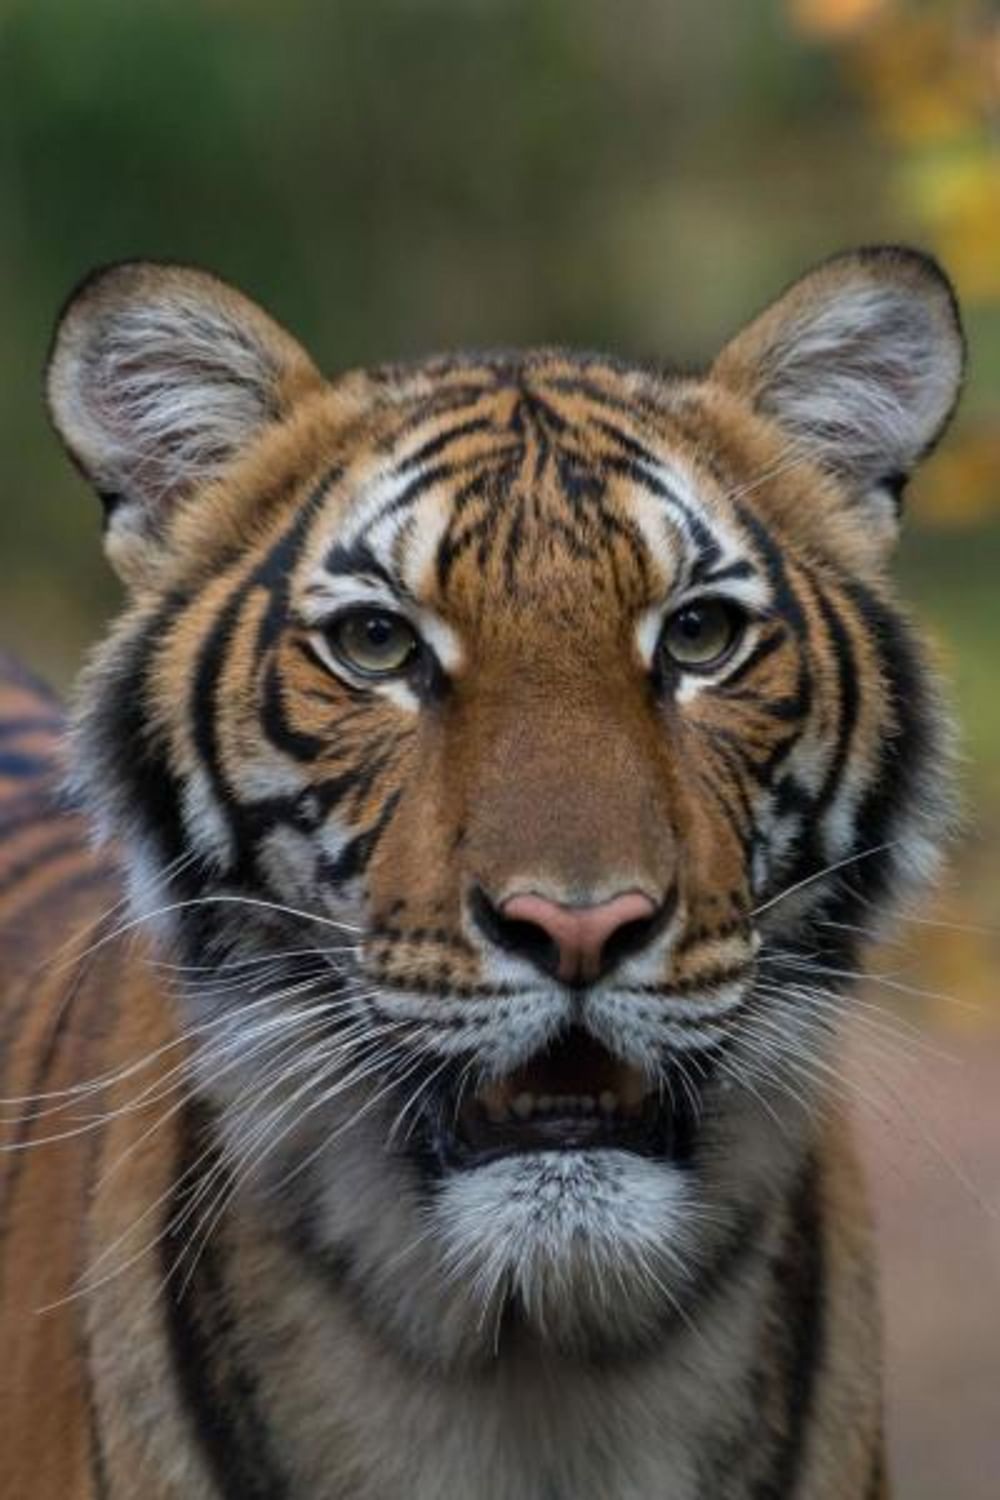 Malayan tiger Nadia who tested positive for Covid-19. - A tiger at New York's Bronx Zoo has tested positive for COVID-19, the institution said Sunday, and is believed to have contracted the virus from a caretaker who was asymptomatic at the time. (AFP Image)